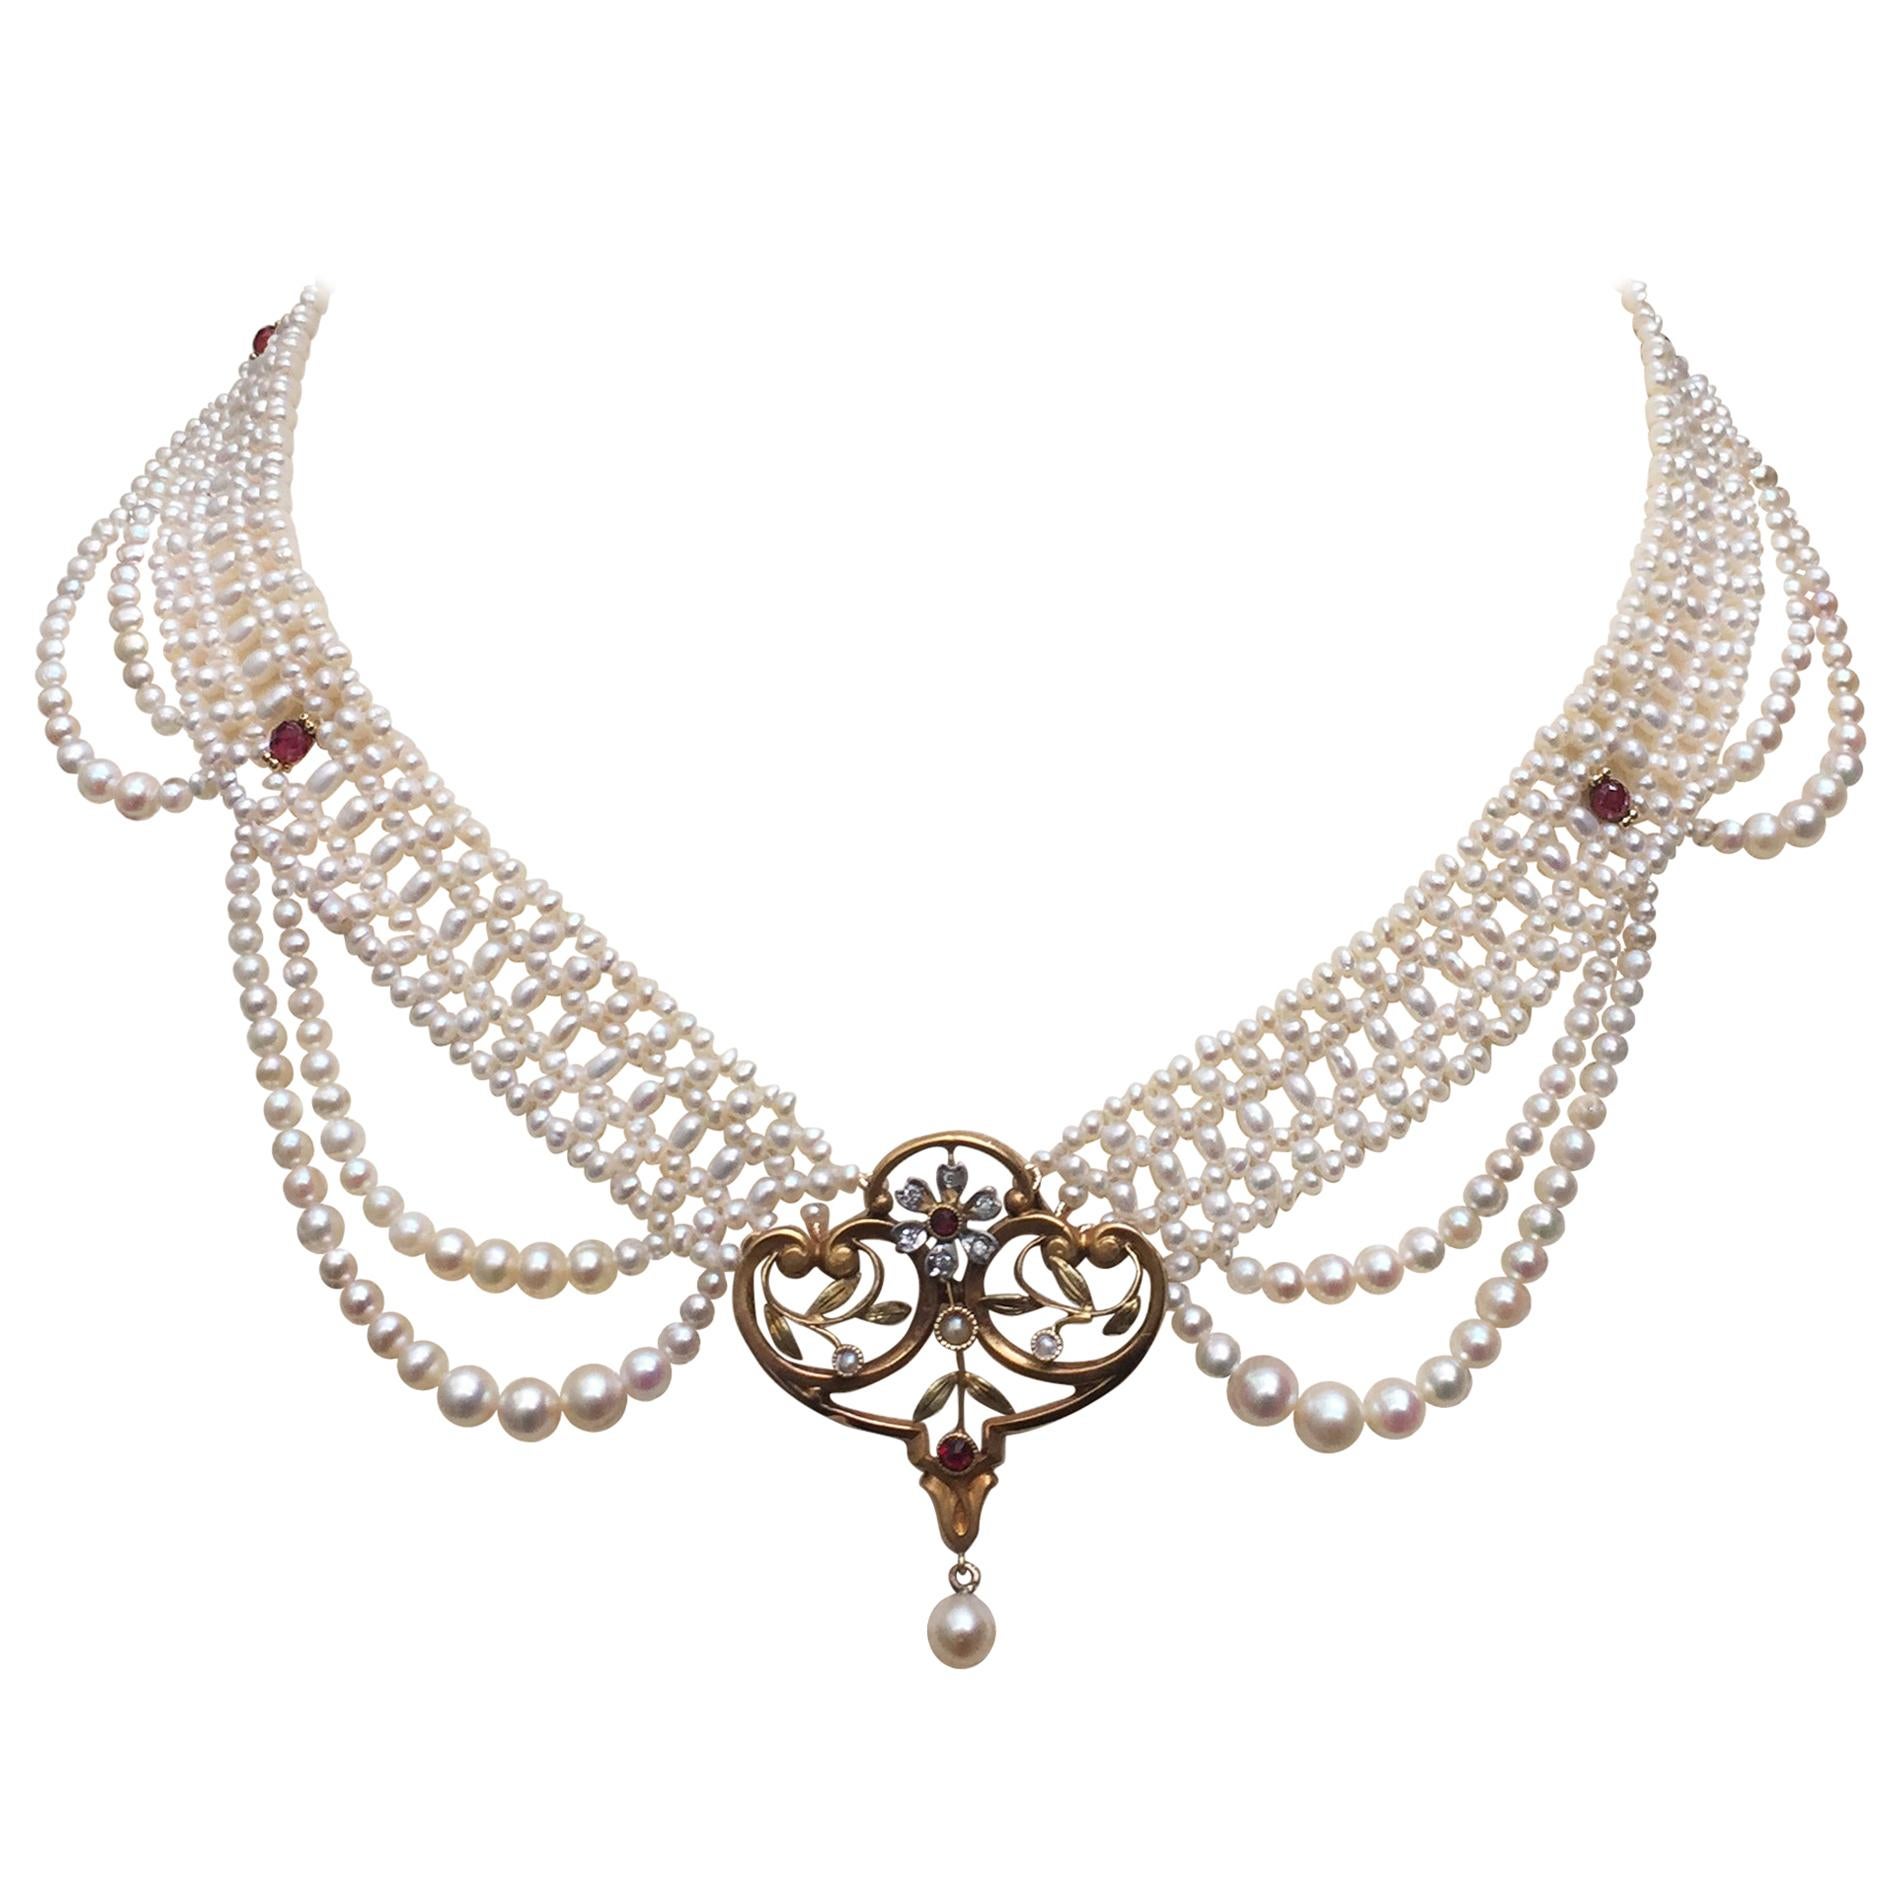 Marina J White Pearl Woven Necklace with Victorian 14k Yellow Gold Centerpiece  